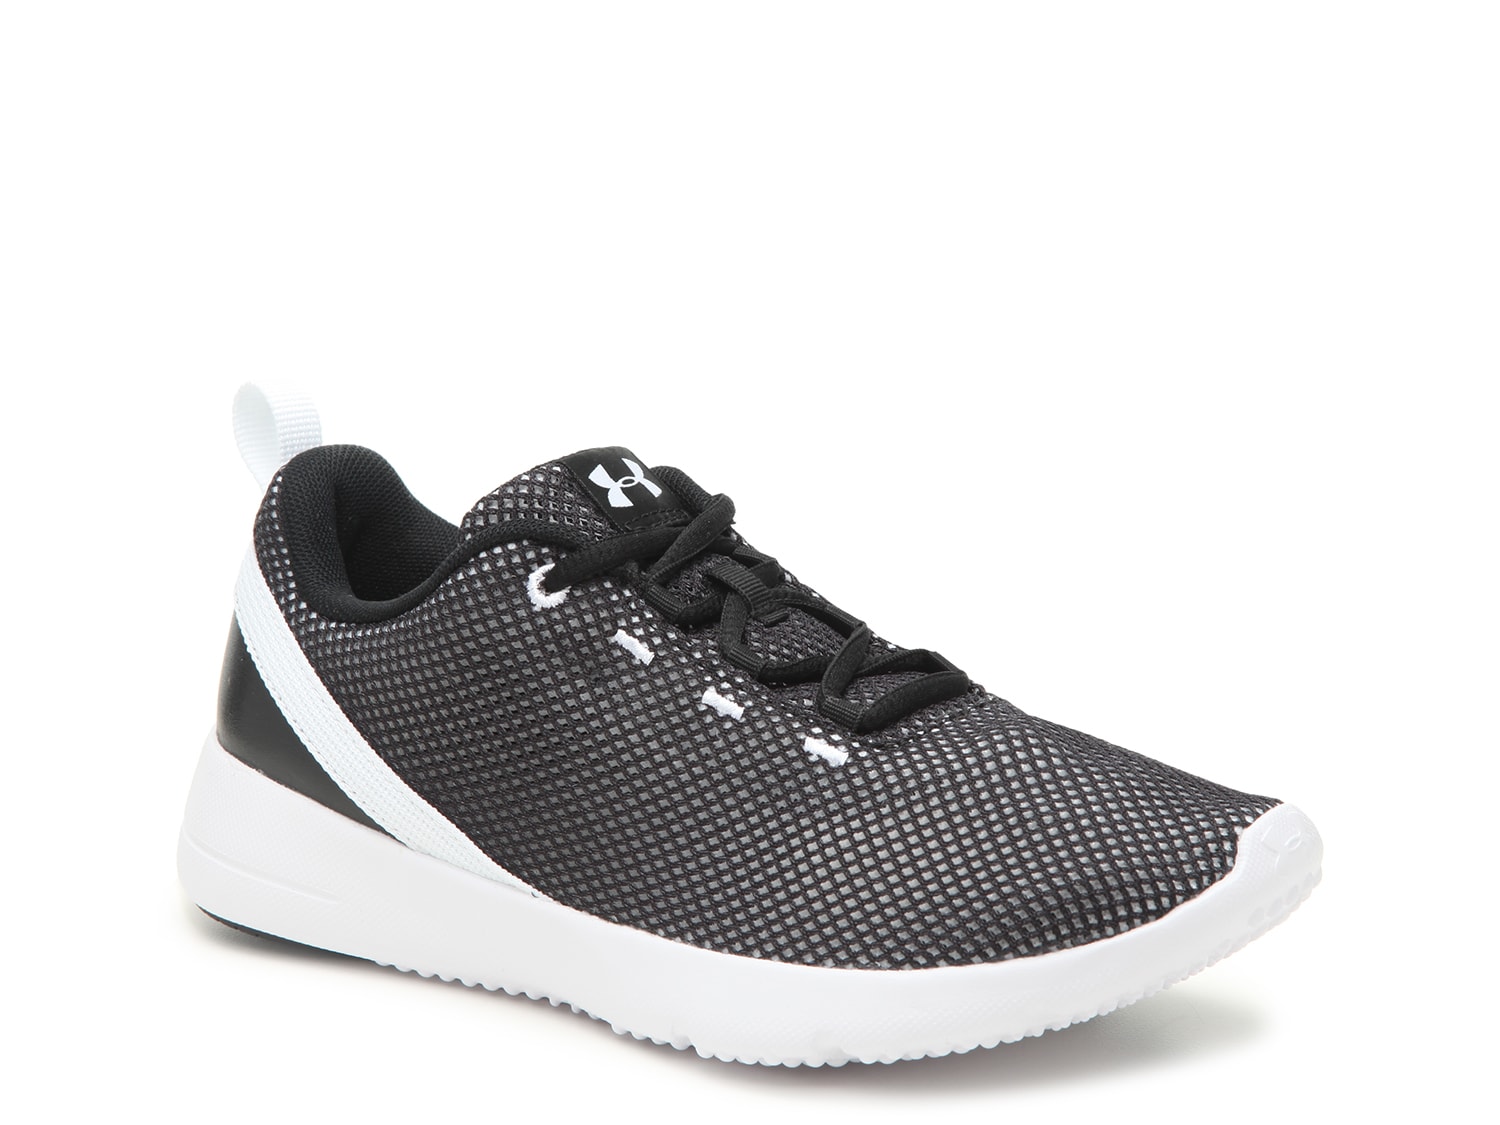 Operación posible barco Centrar Under Armour Squad 2 Lightweight Training Shoe - Women's - Free Shipping |  DSW